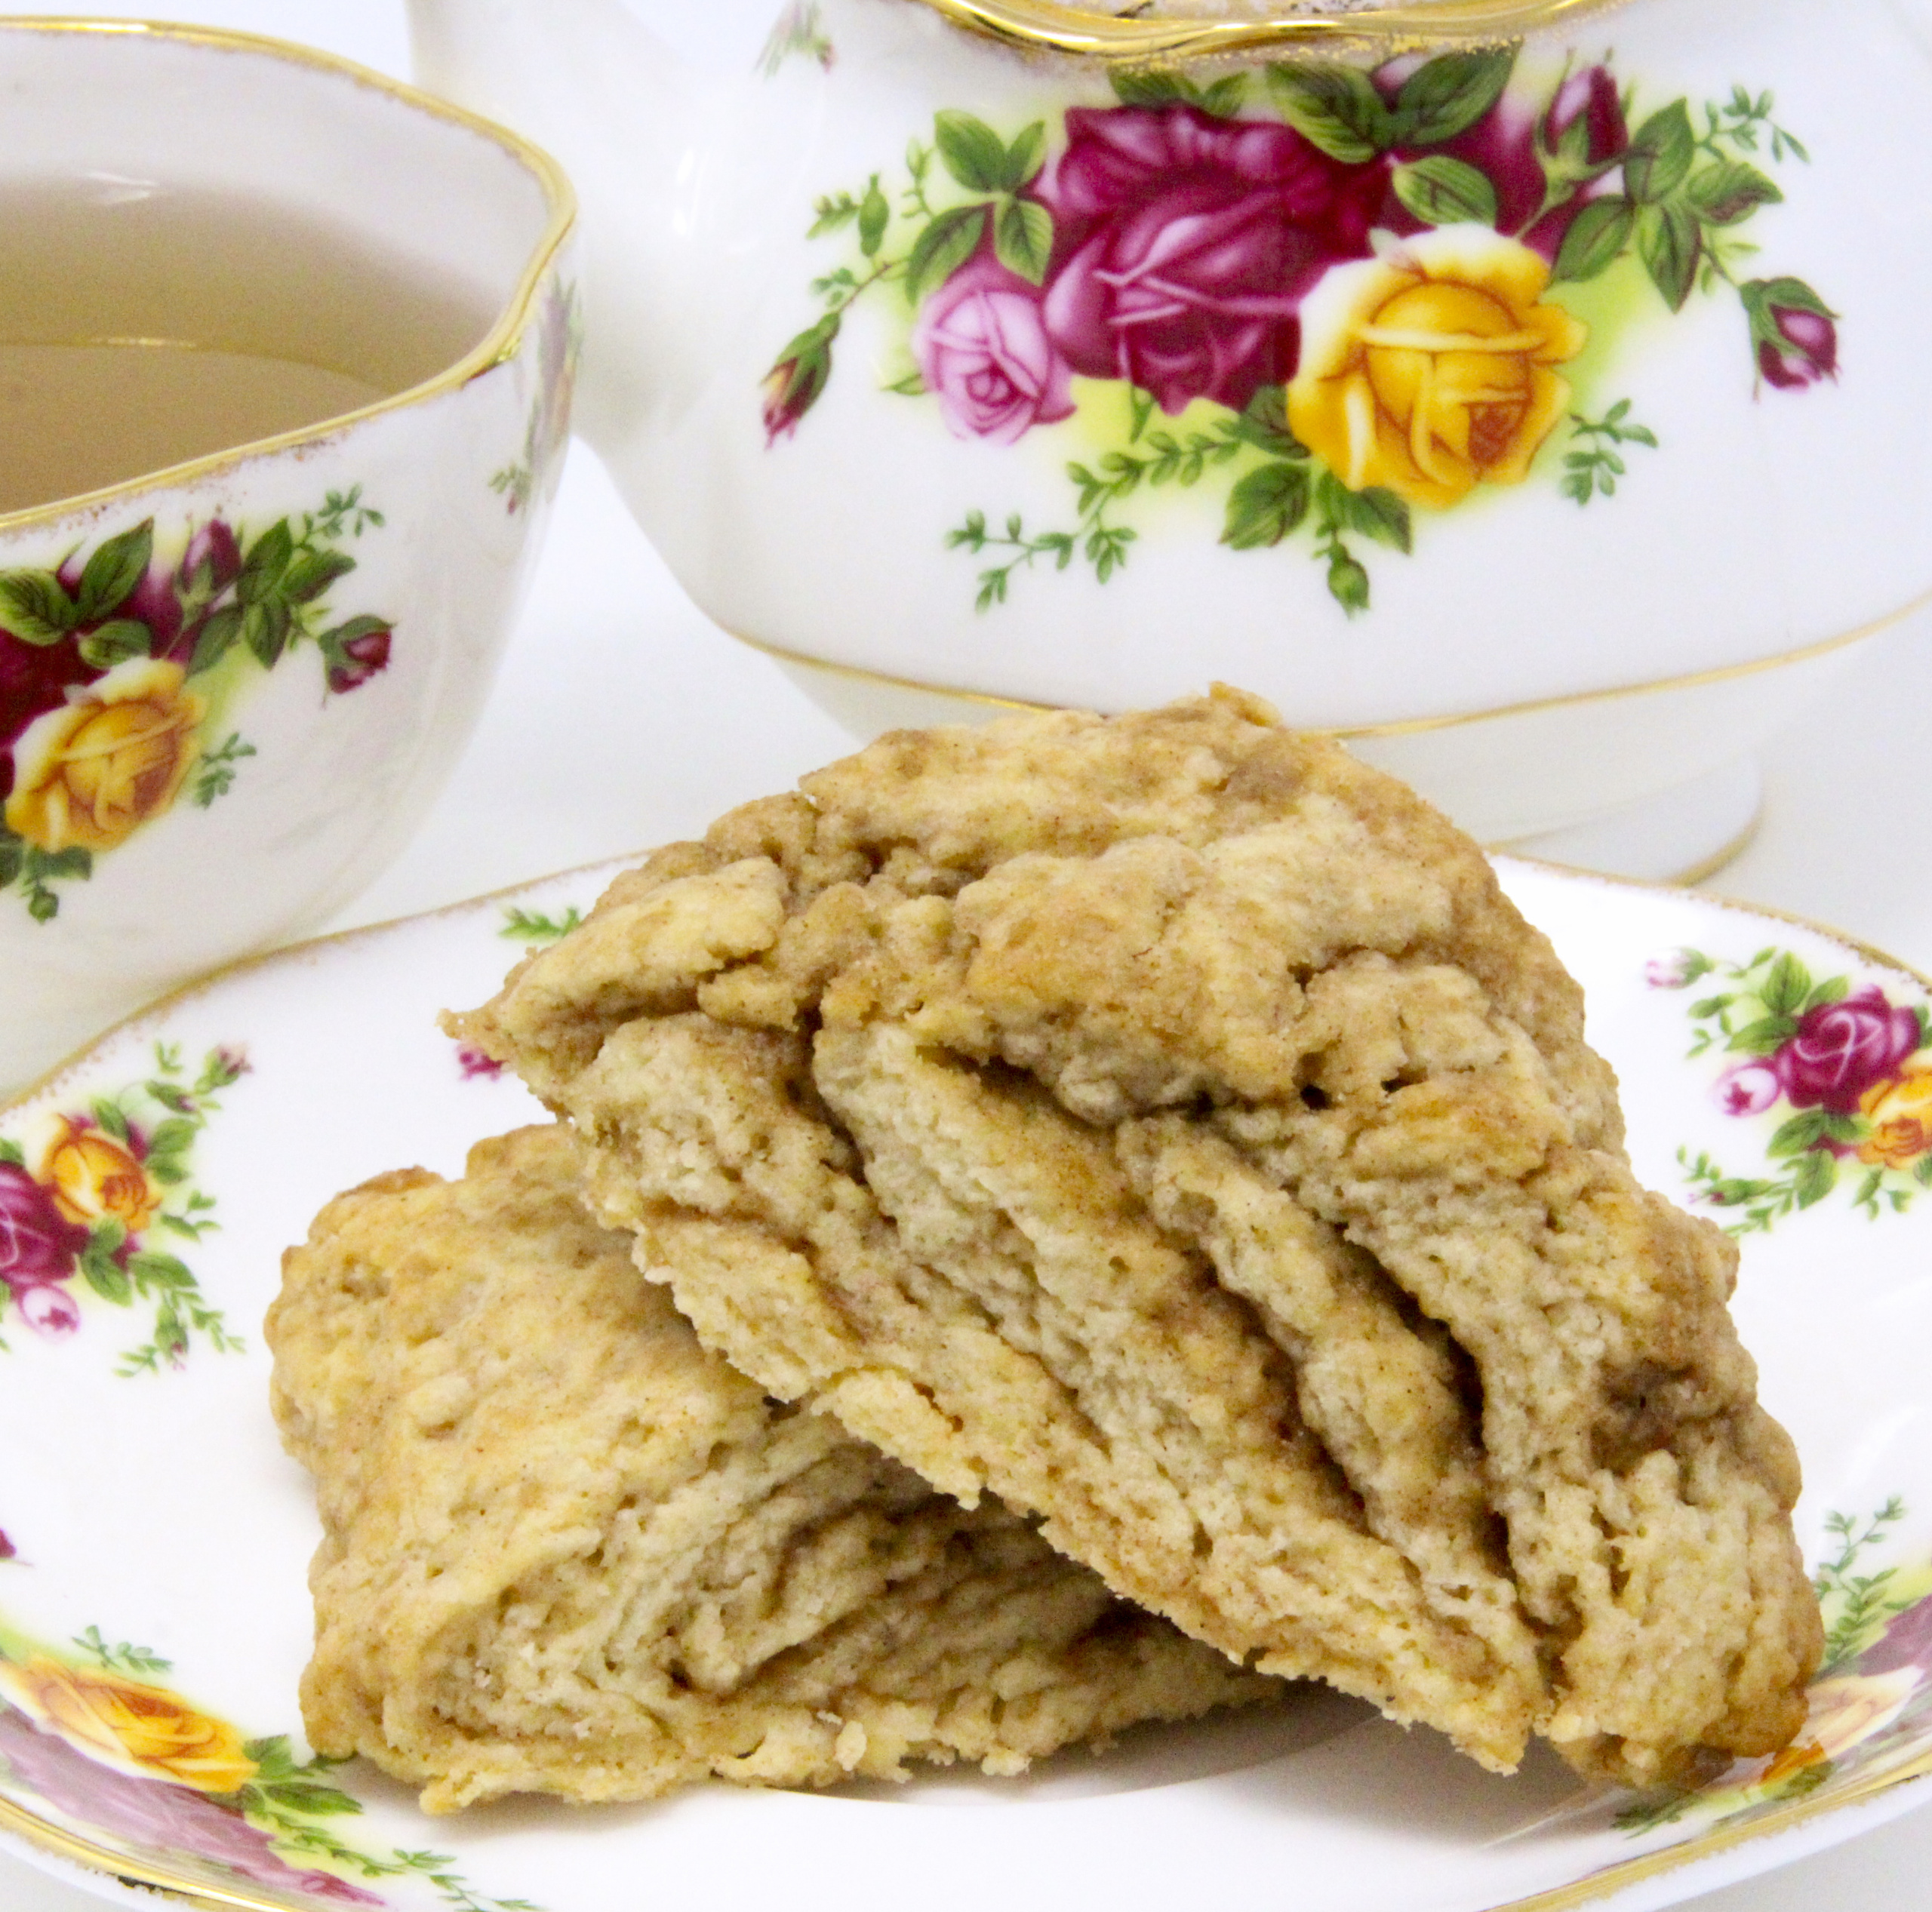 These melt-in-your-mouth flaky Cinnamon Swirl Scones are chock full of flavor thanks to a generous amount of cinnamon and brown sugar. Recipe shared with permission granted by Daryl Wood Gerber, author of A GLIMMER OF A CLUE.